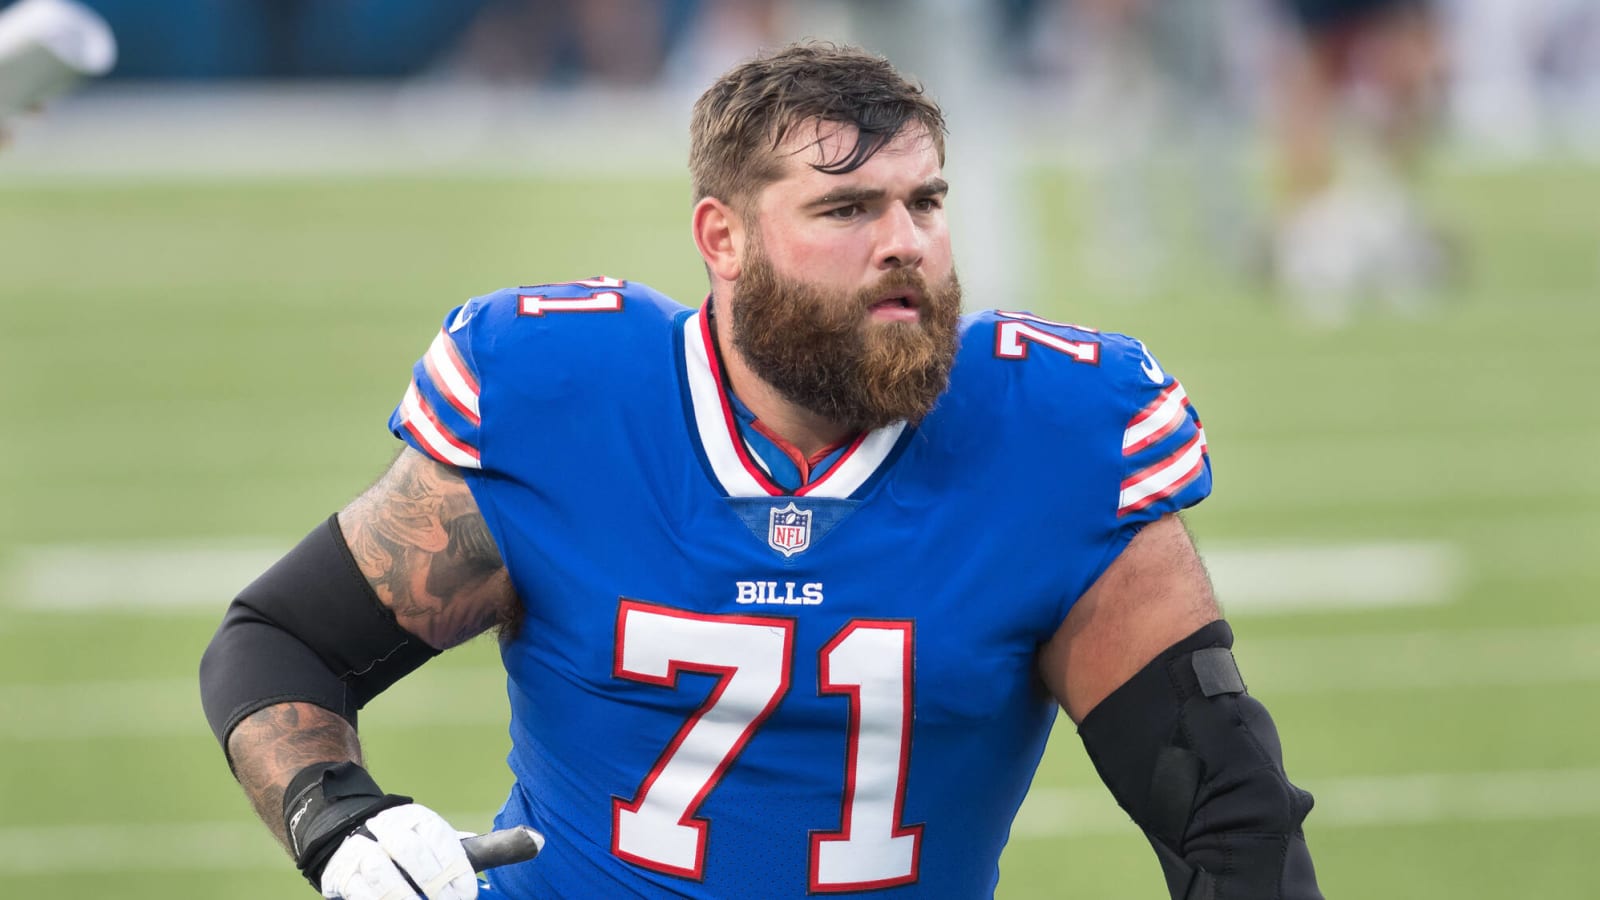 Bears receive offensive lineman in trade with Bills